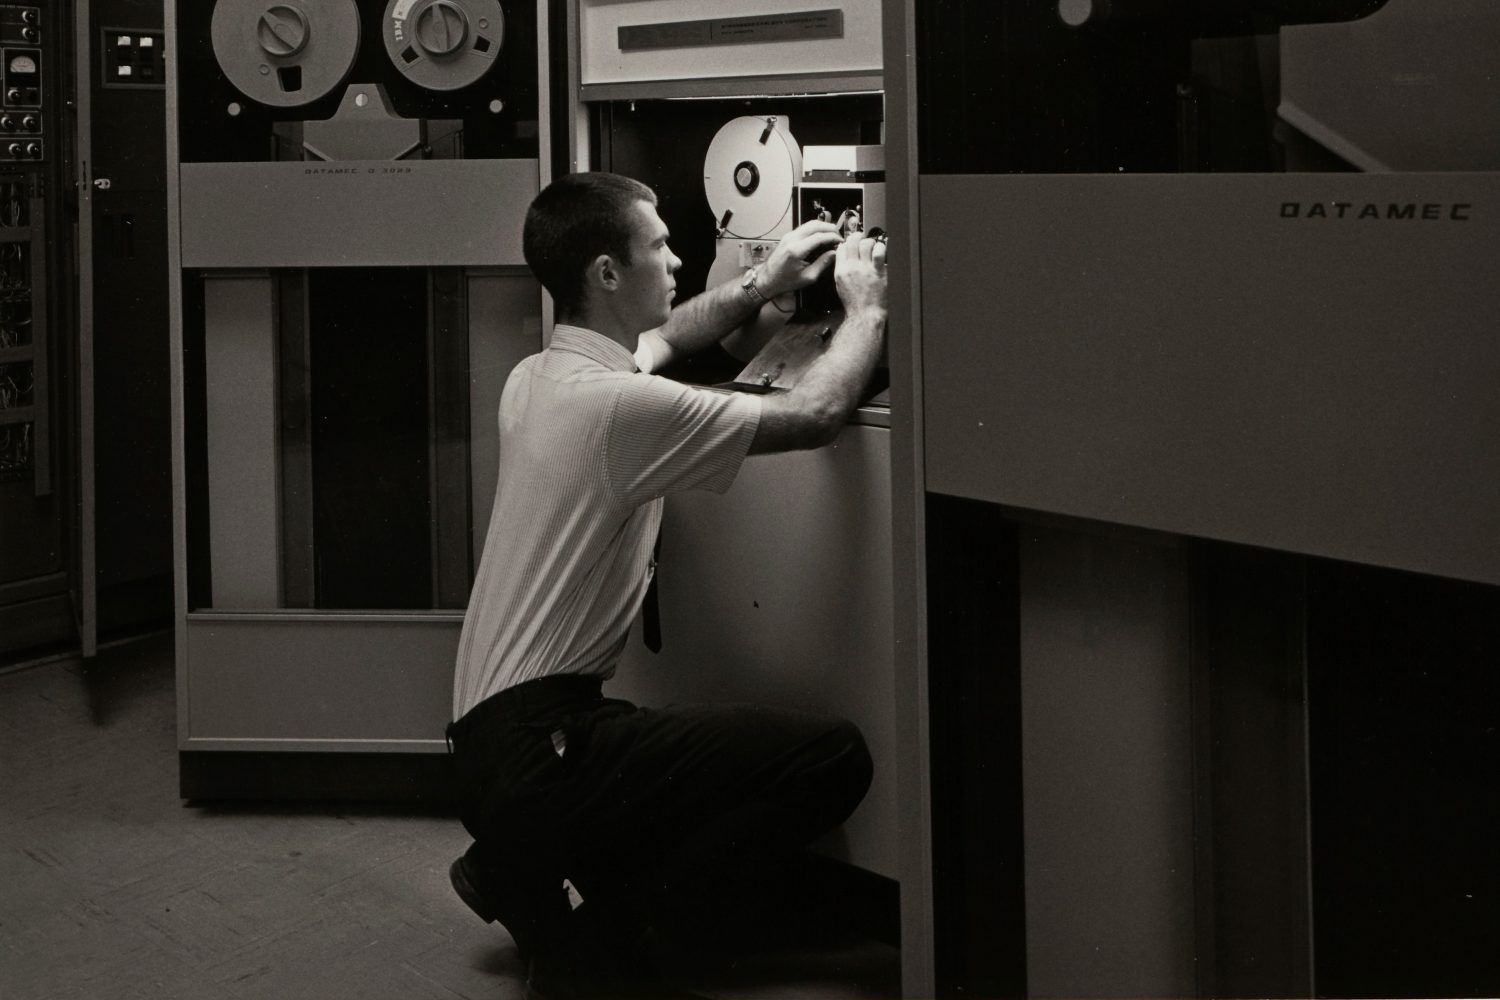 Man works on the SC4400 magnetic tape recorder.